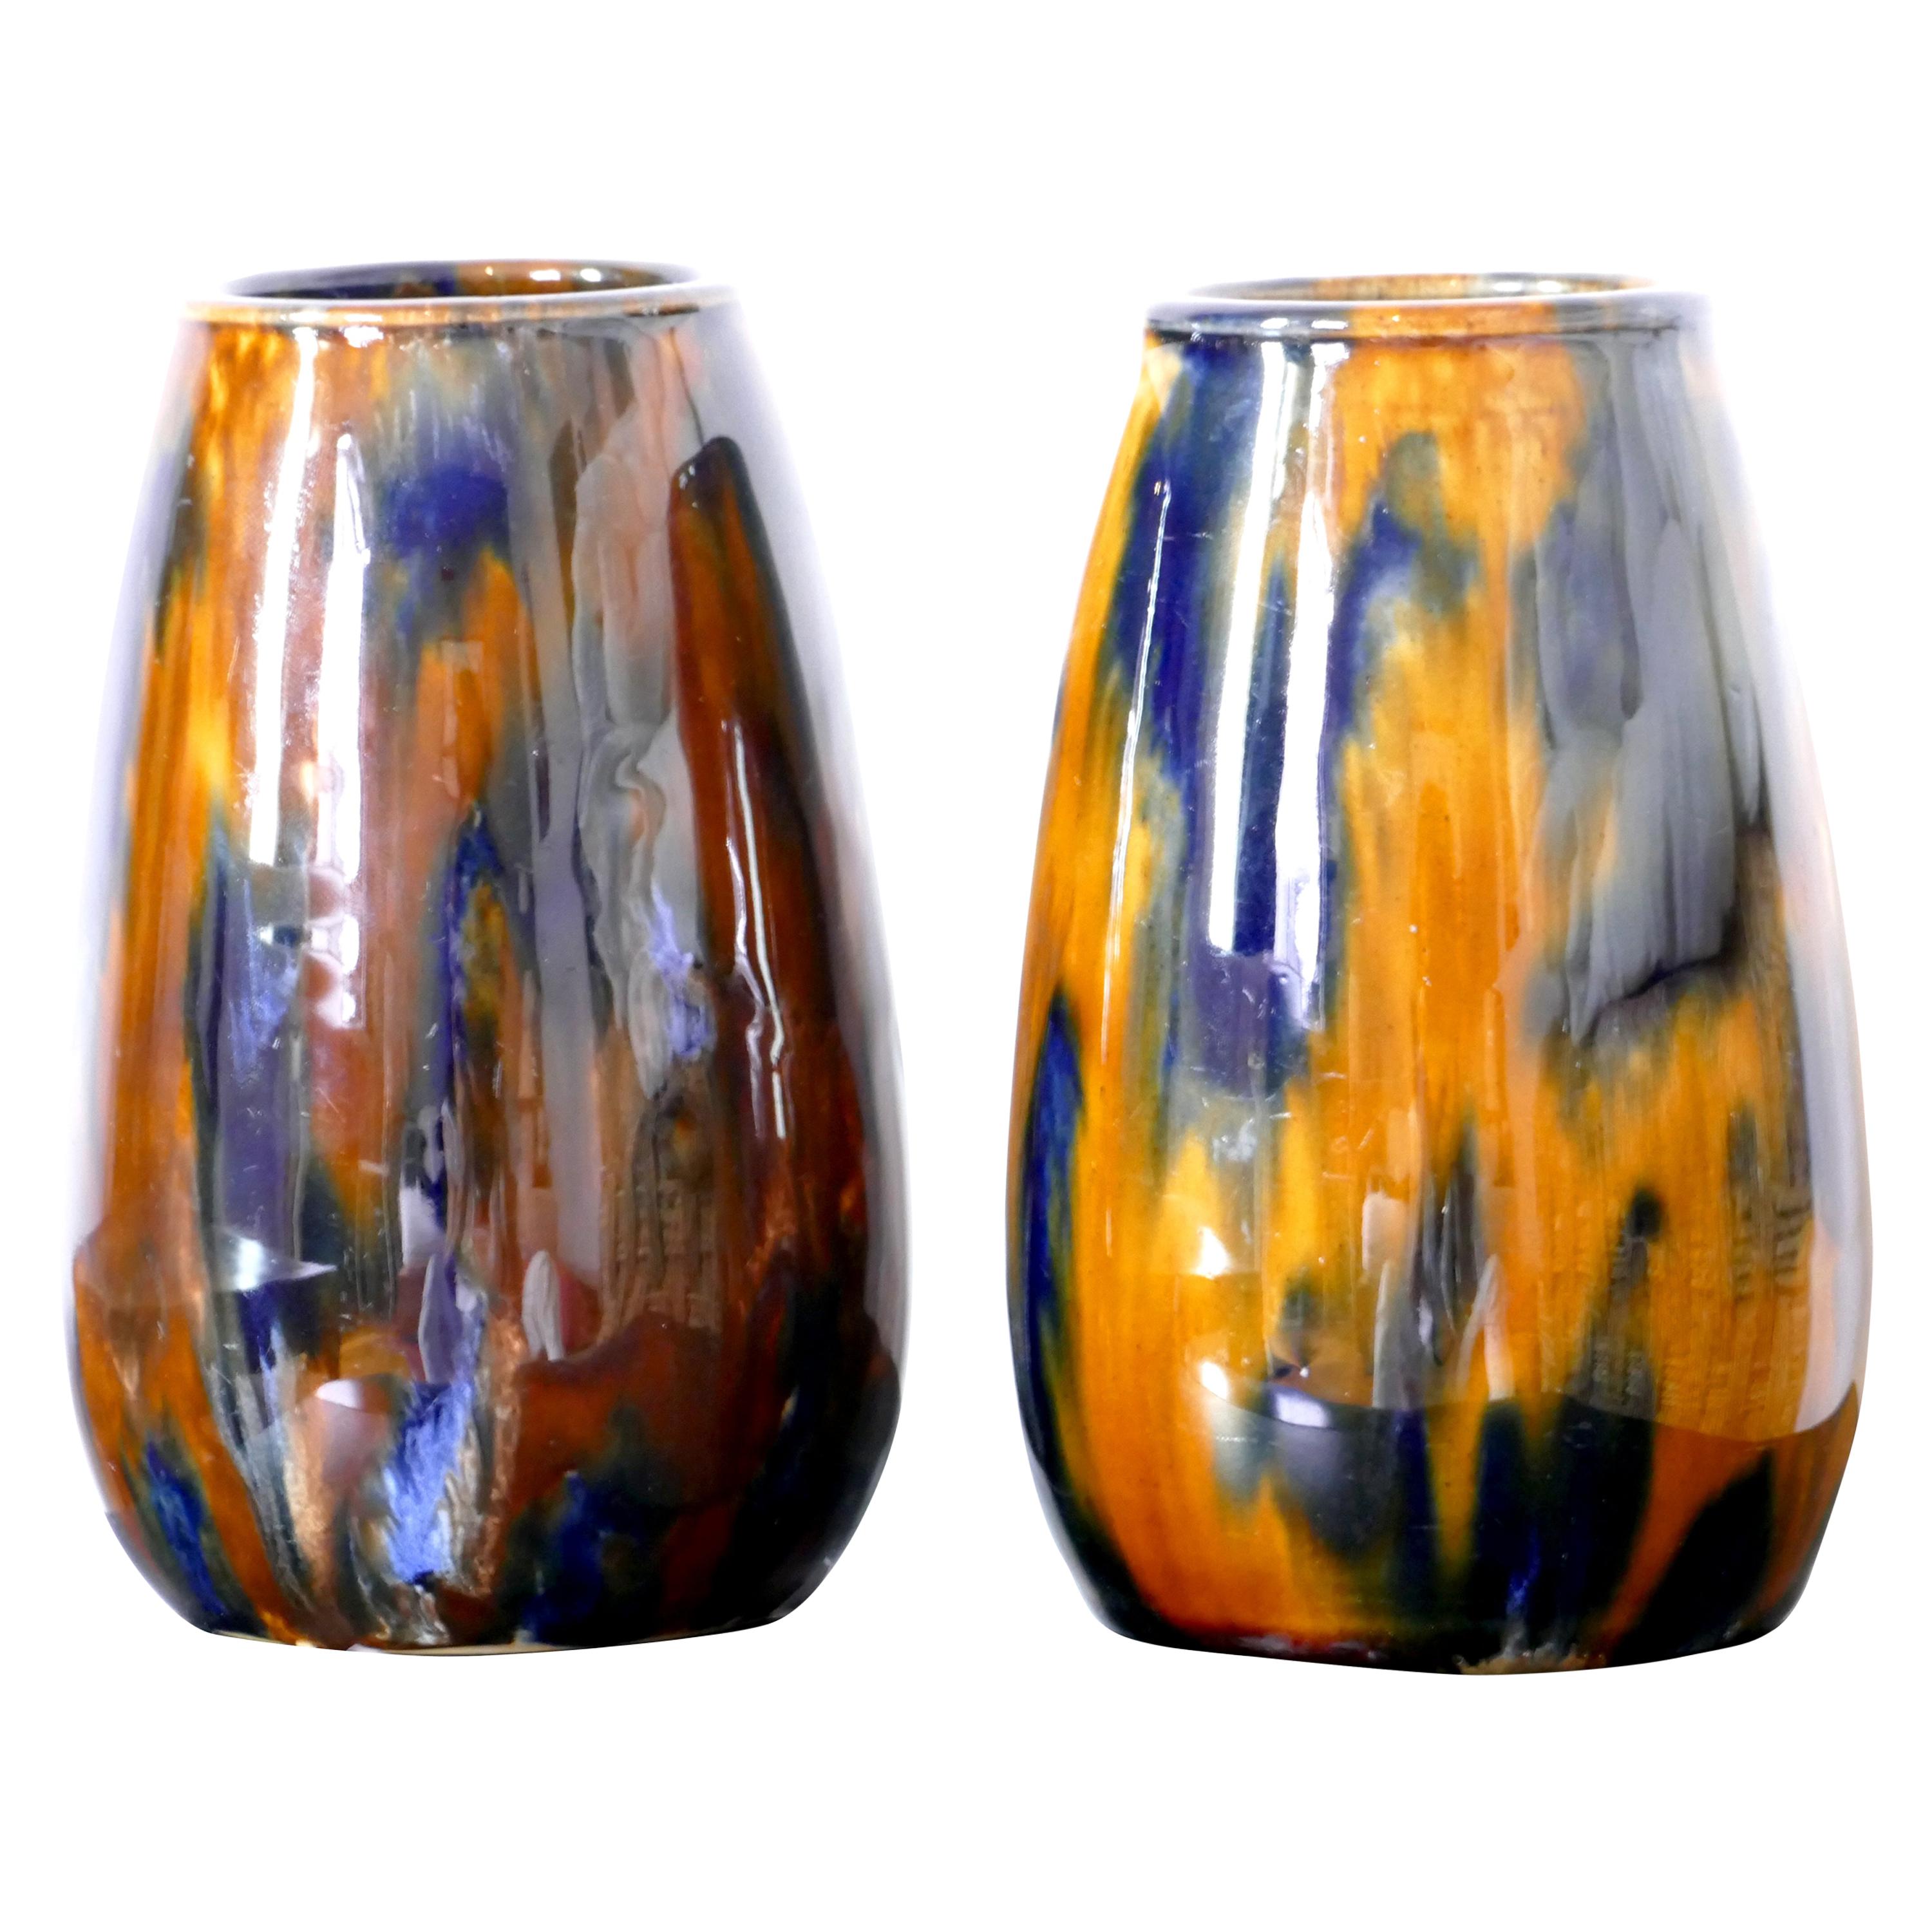 Vintage Pair of Polychrome Vases by G.H. Richard London Matlock, Late 1900 For Sale